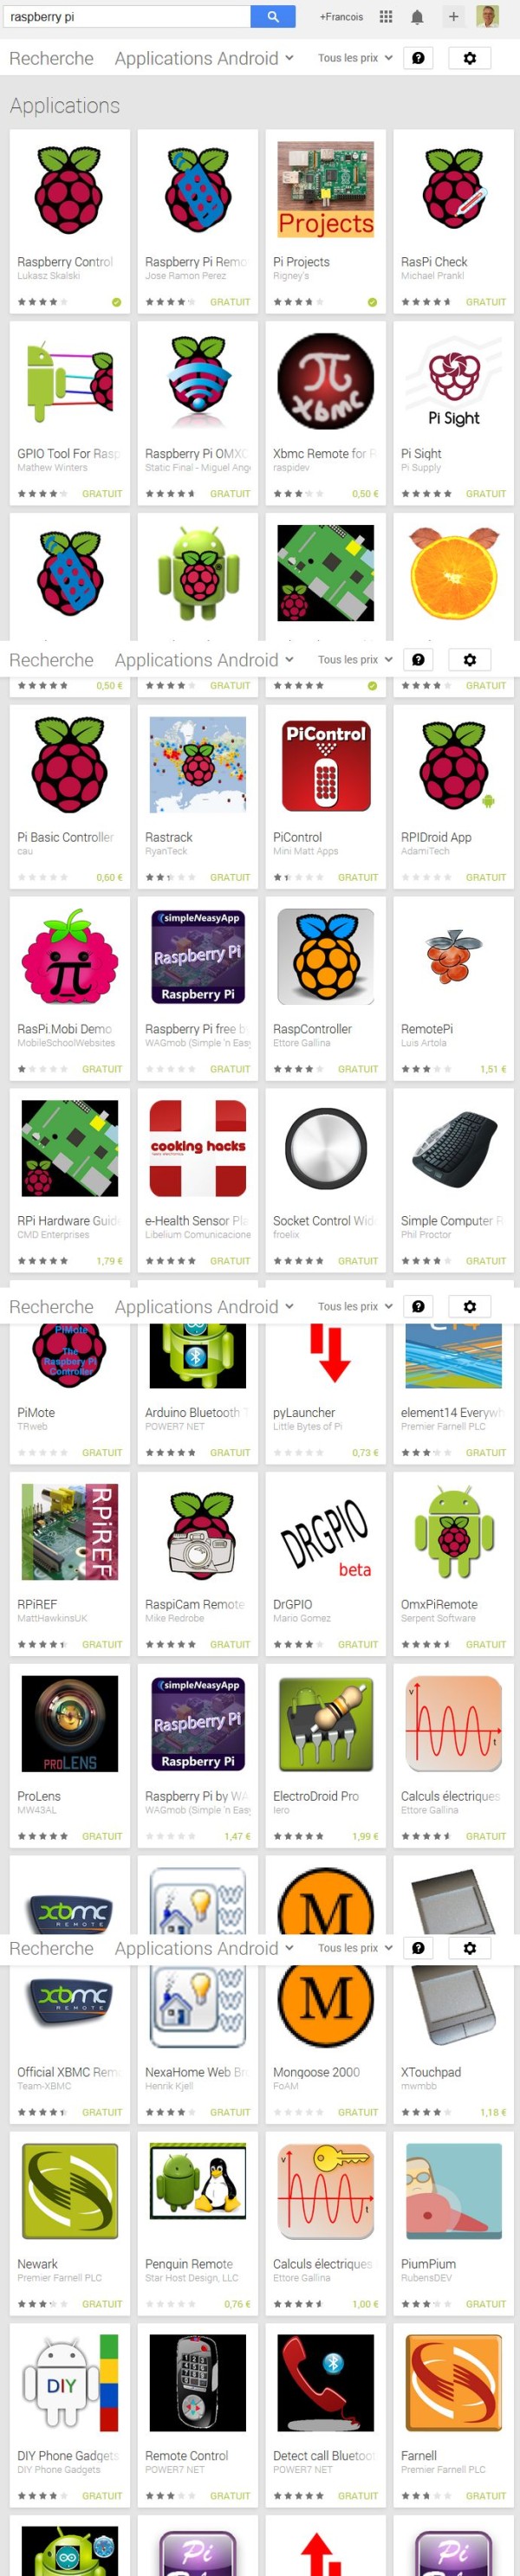 applis android